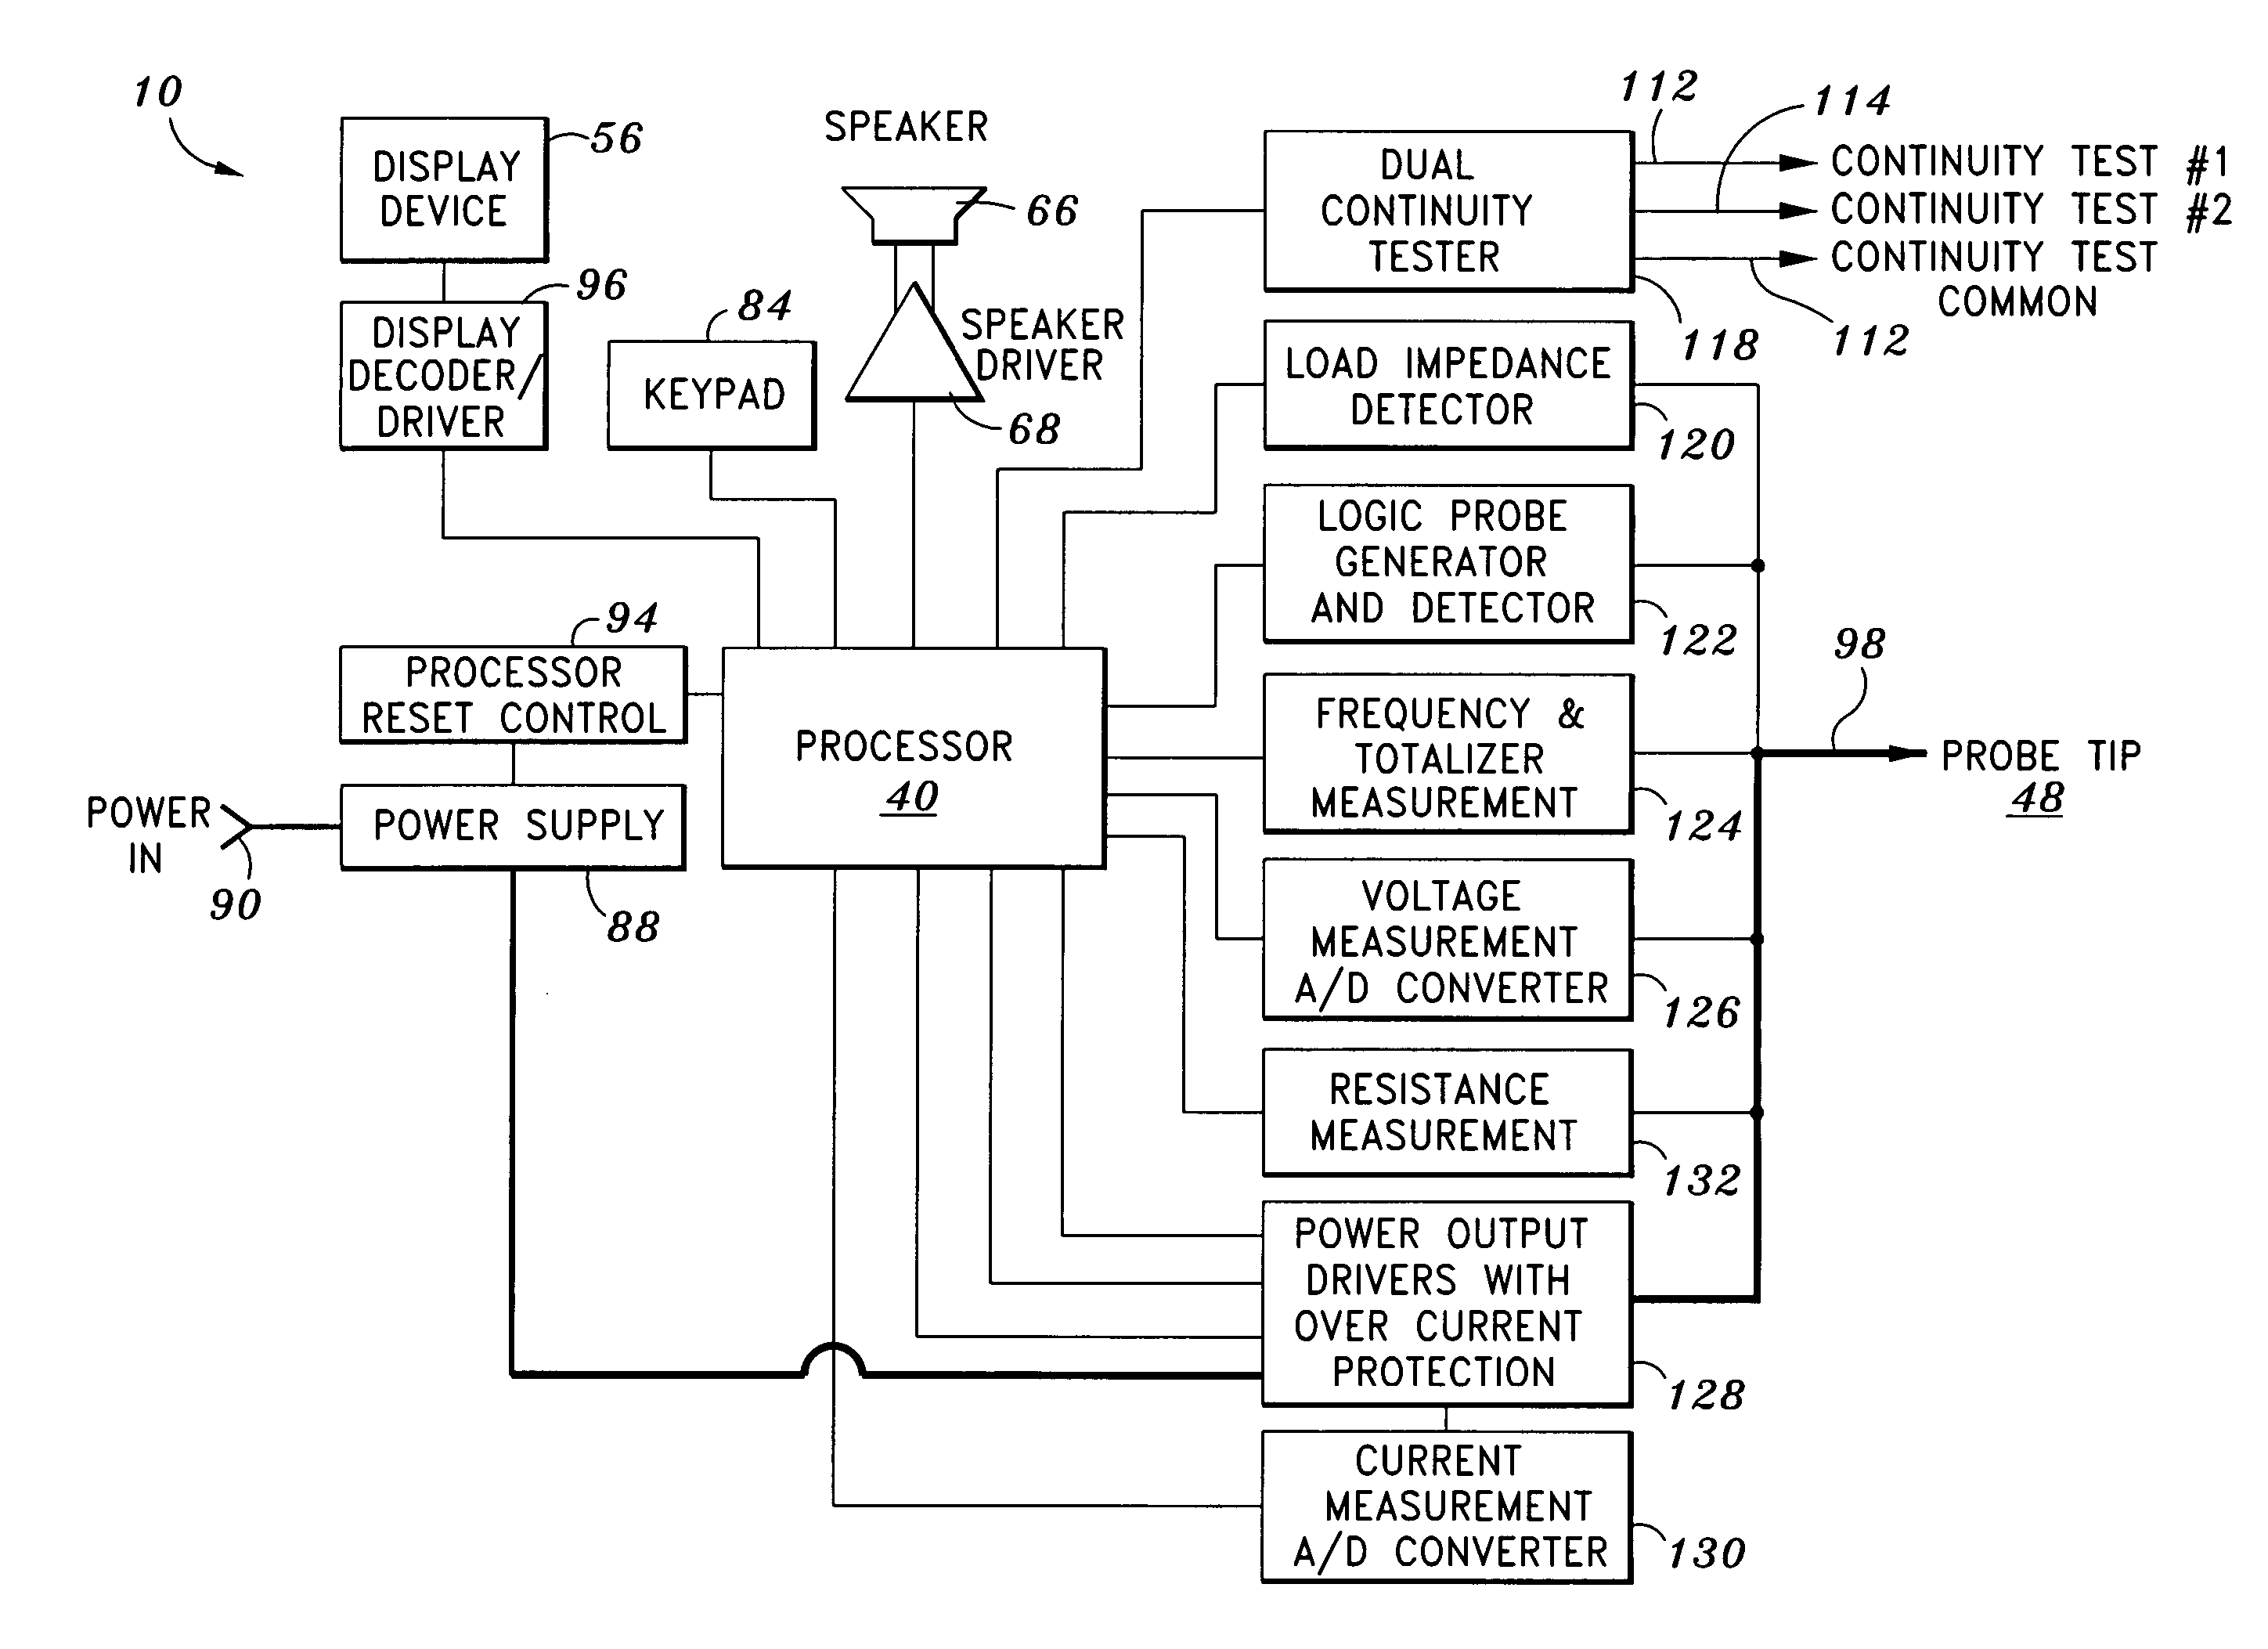 Energizable electrical test device for measuring current and resistance of an electrical circuit